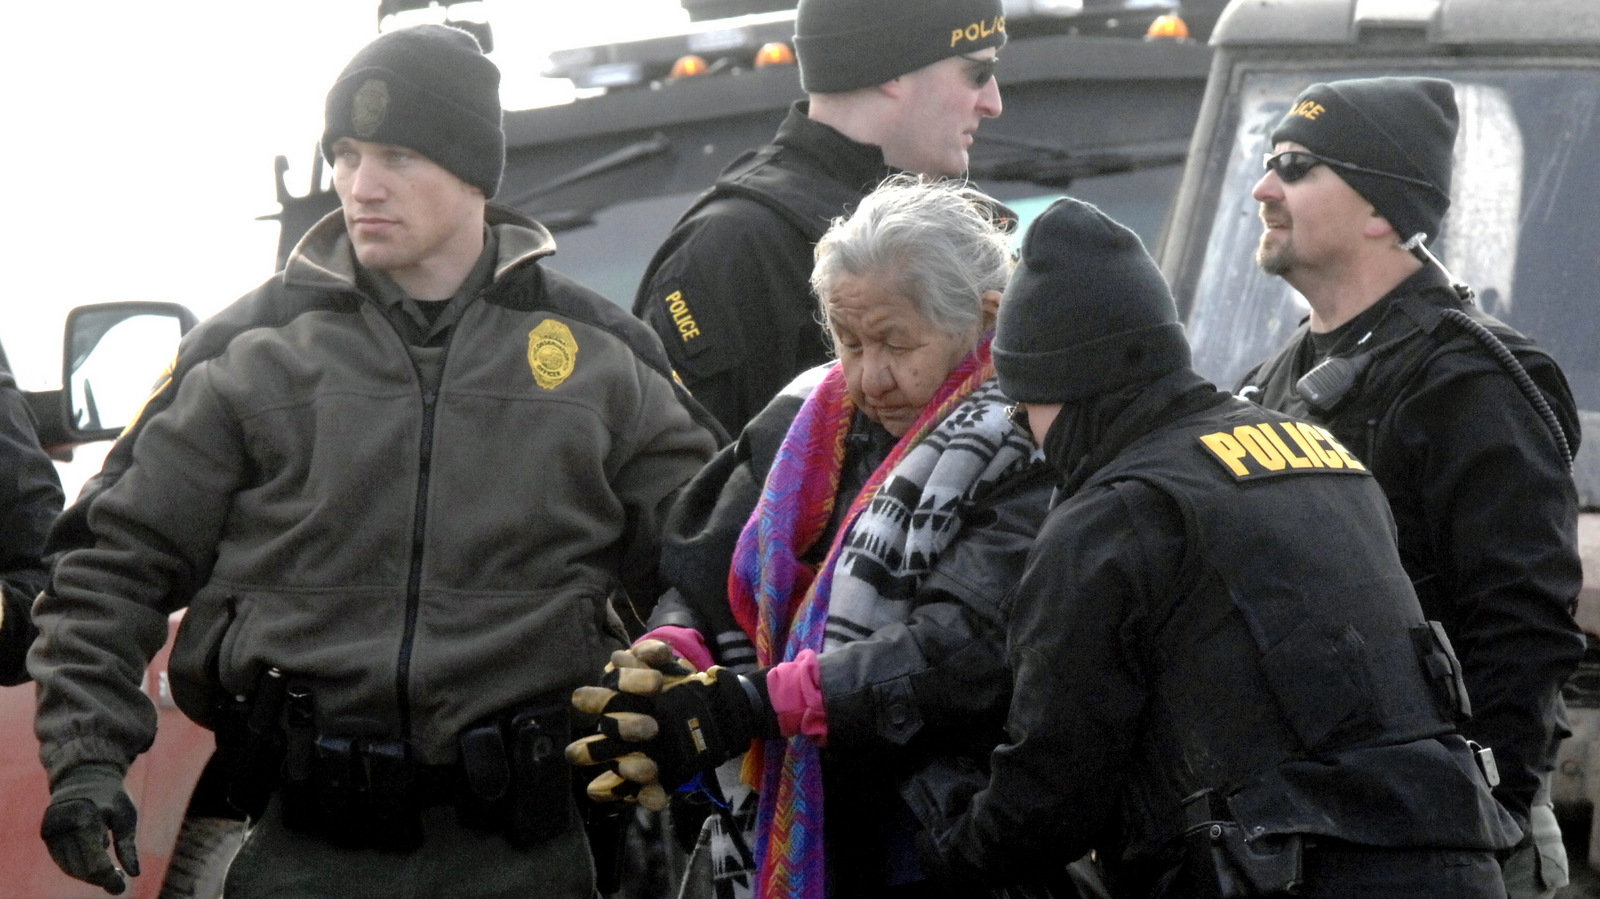 An elderly woman is escorted to a transport van after being arrested by law enforcement at the Oceti Sakowin camp as part of the final sweep of the Dakota Access pipeline protesters in Morton County, Feb. 23, 2017, near Cannon Ball, N.D. (Mike McCleary/The Bismarck Tribune)